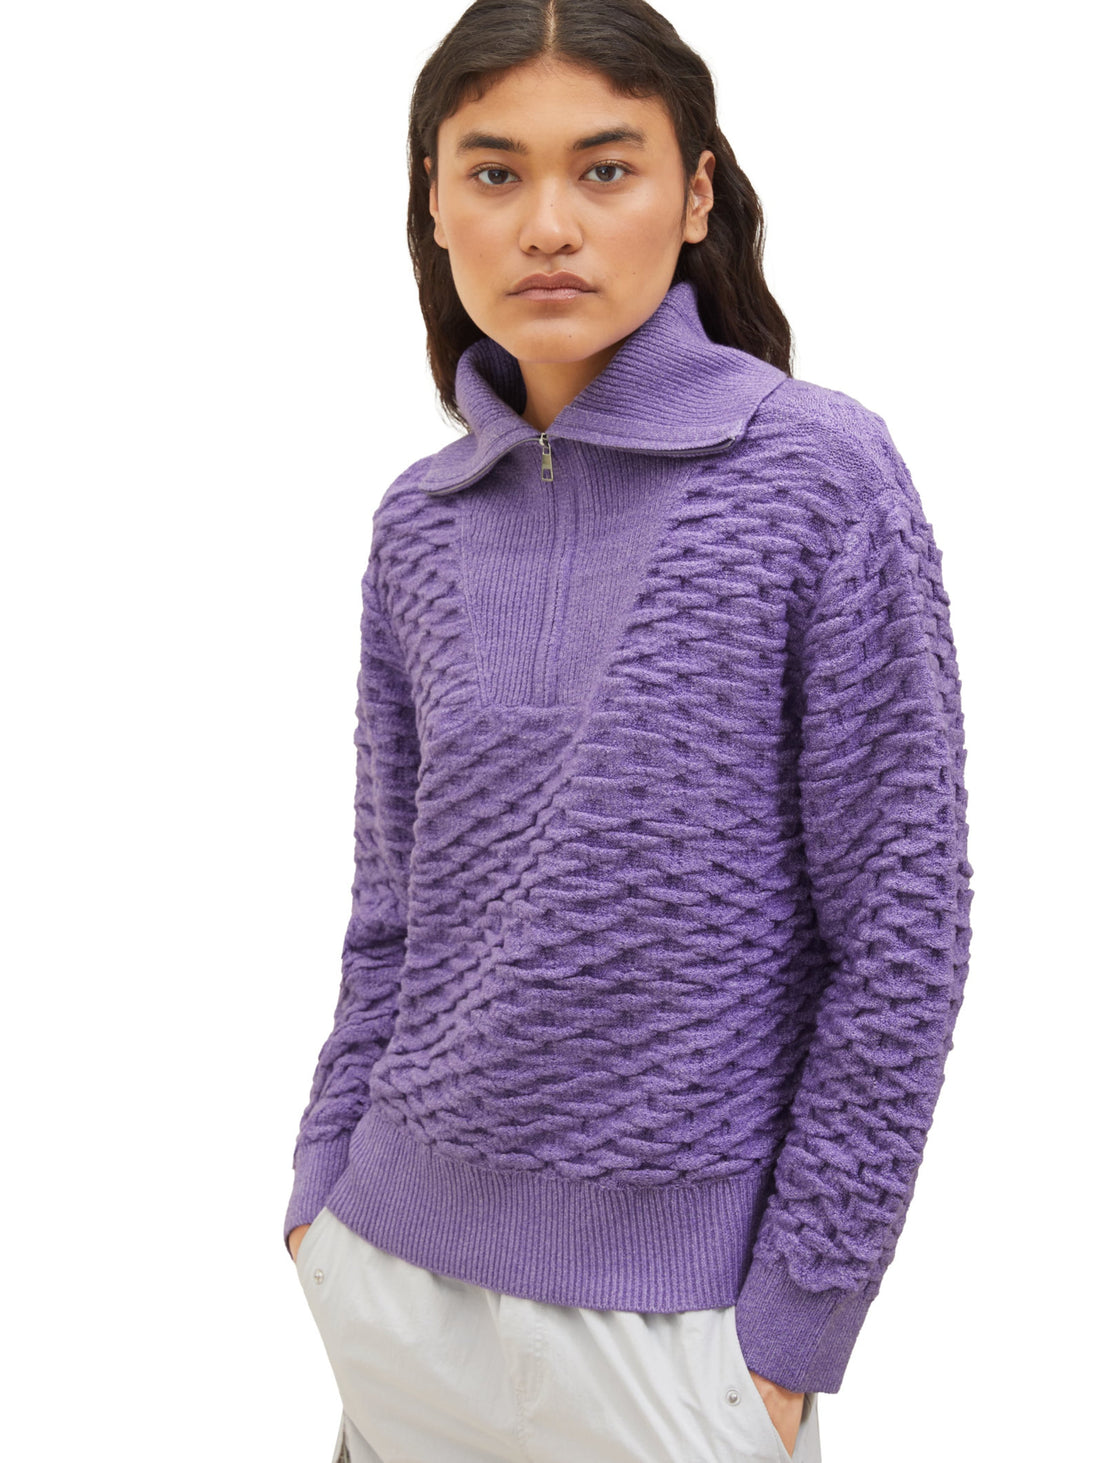 Knitted Sweater With Quarter Zip_1038155_32255_02